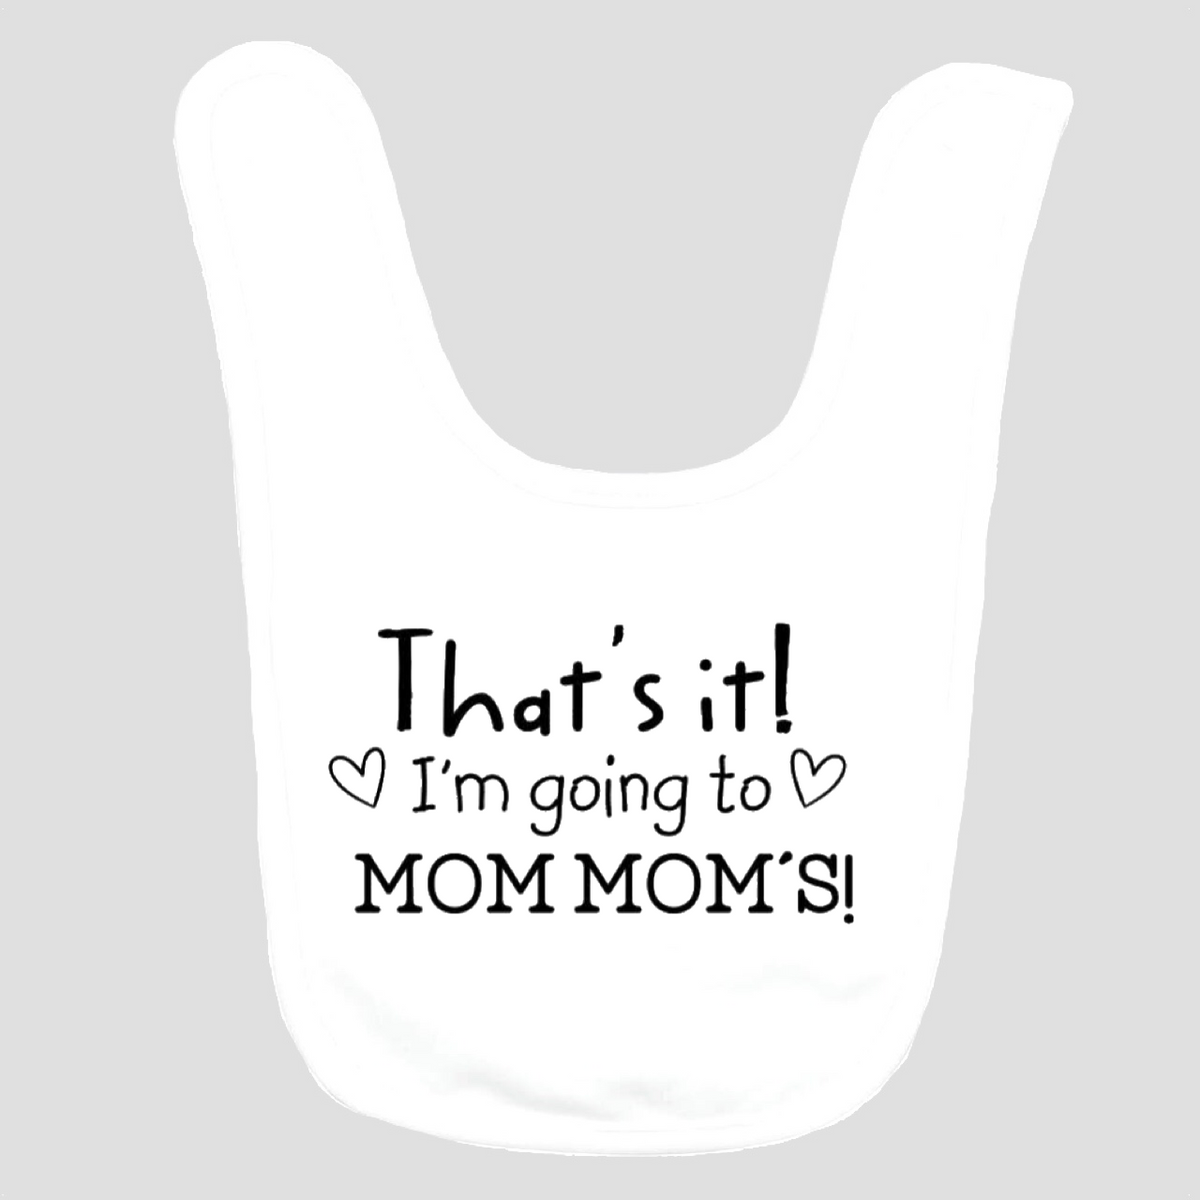 Baby Bib: That's It! I'm going to MomMom's!